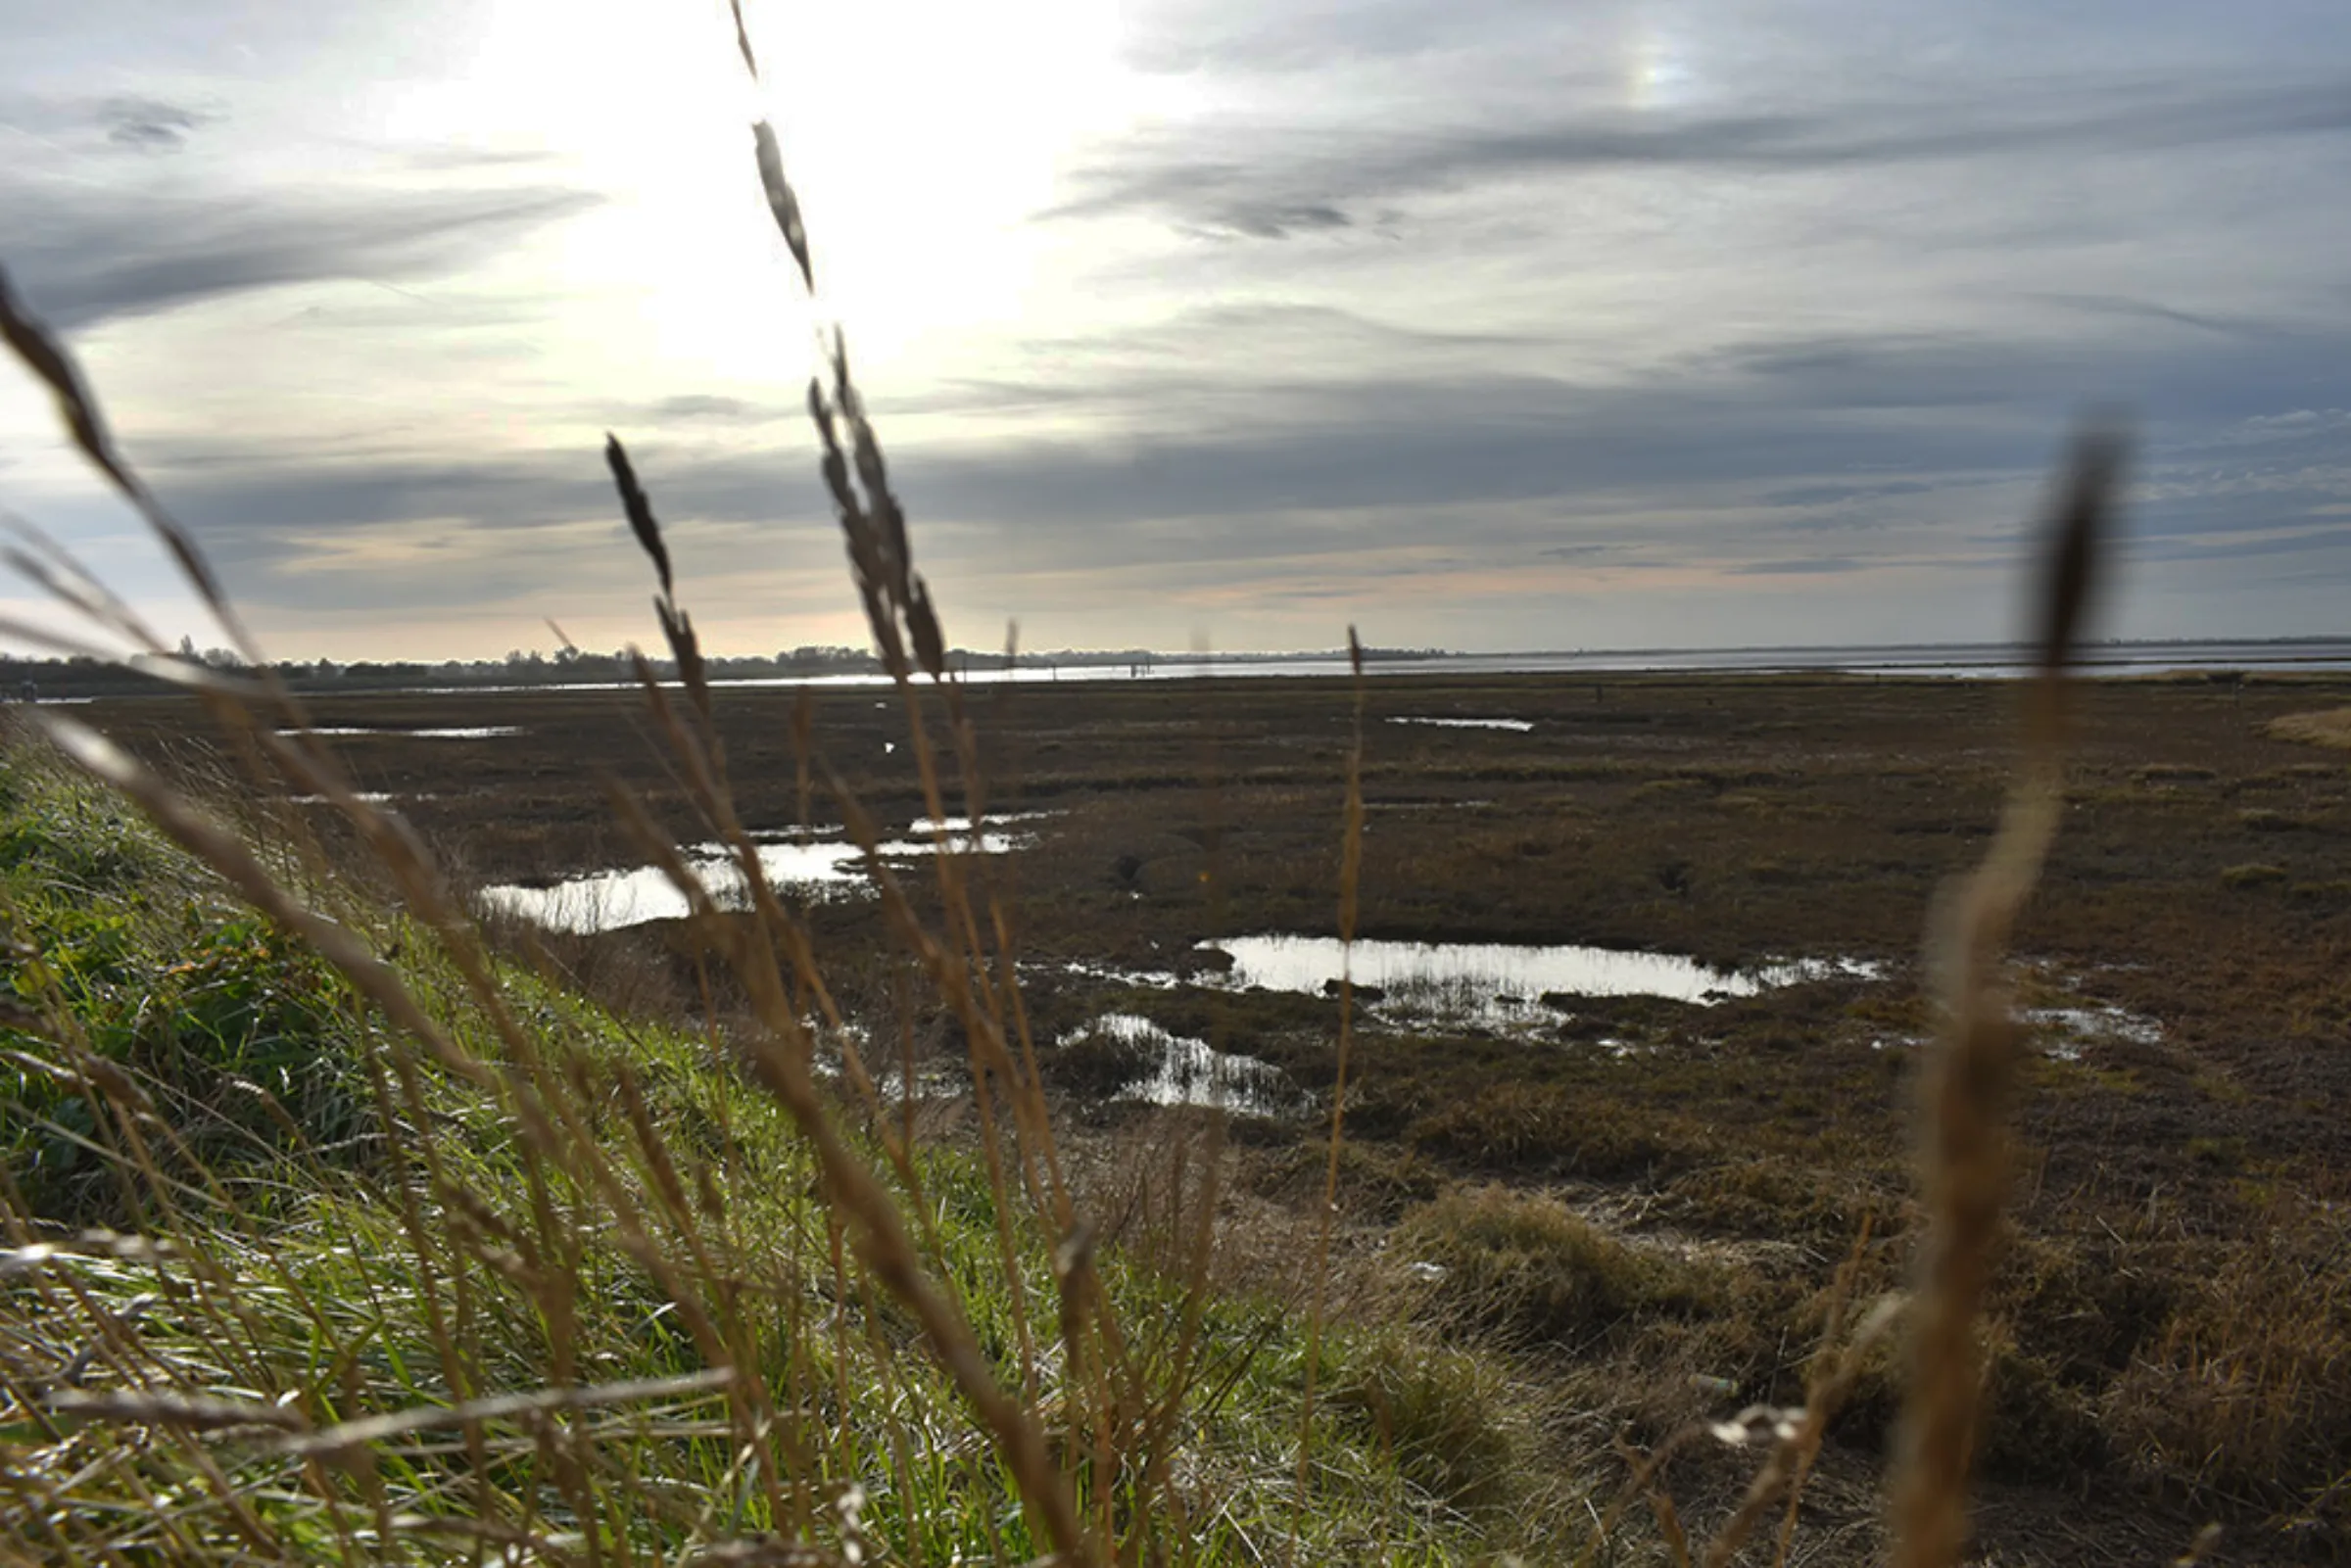 Breydon Water, near the mouth of the River Yare where the Broads rivers drain into the North Sea, is a protected biodiversity site near Great Yarmouth, east England, February 10, 2023. Thomson Reuters Foundation/Rachel Parsons